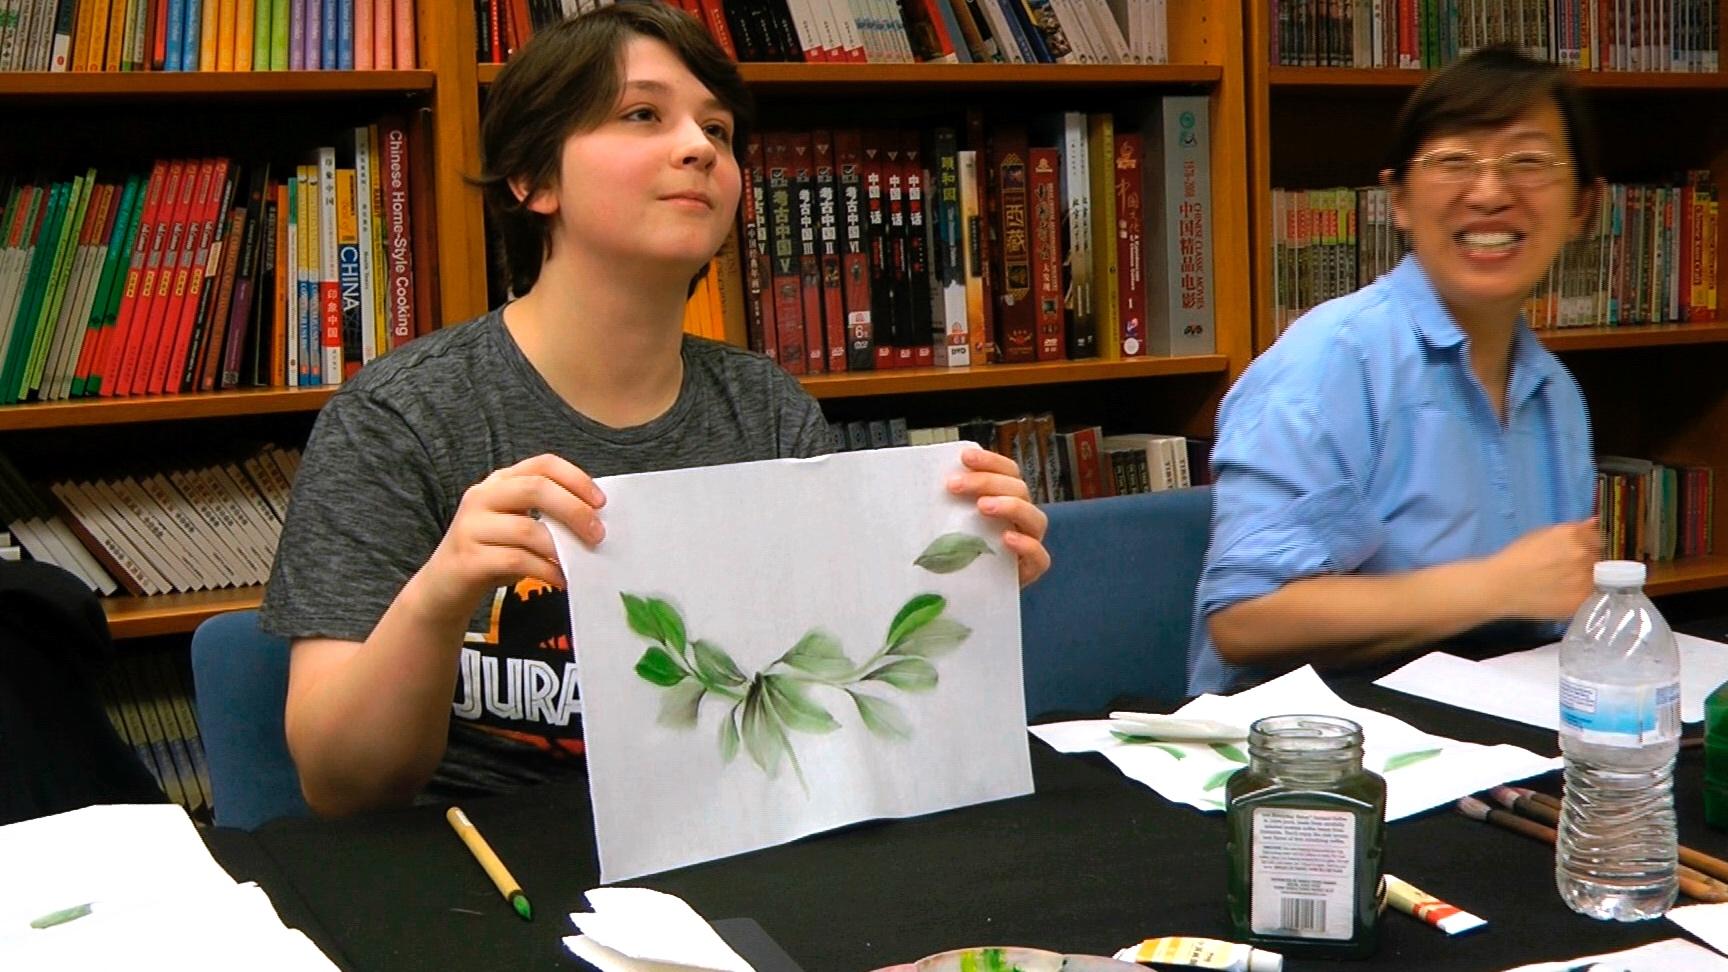 A white woman holds up a drawing of a plant next to a Chinese woman sitting at a table together 